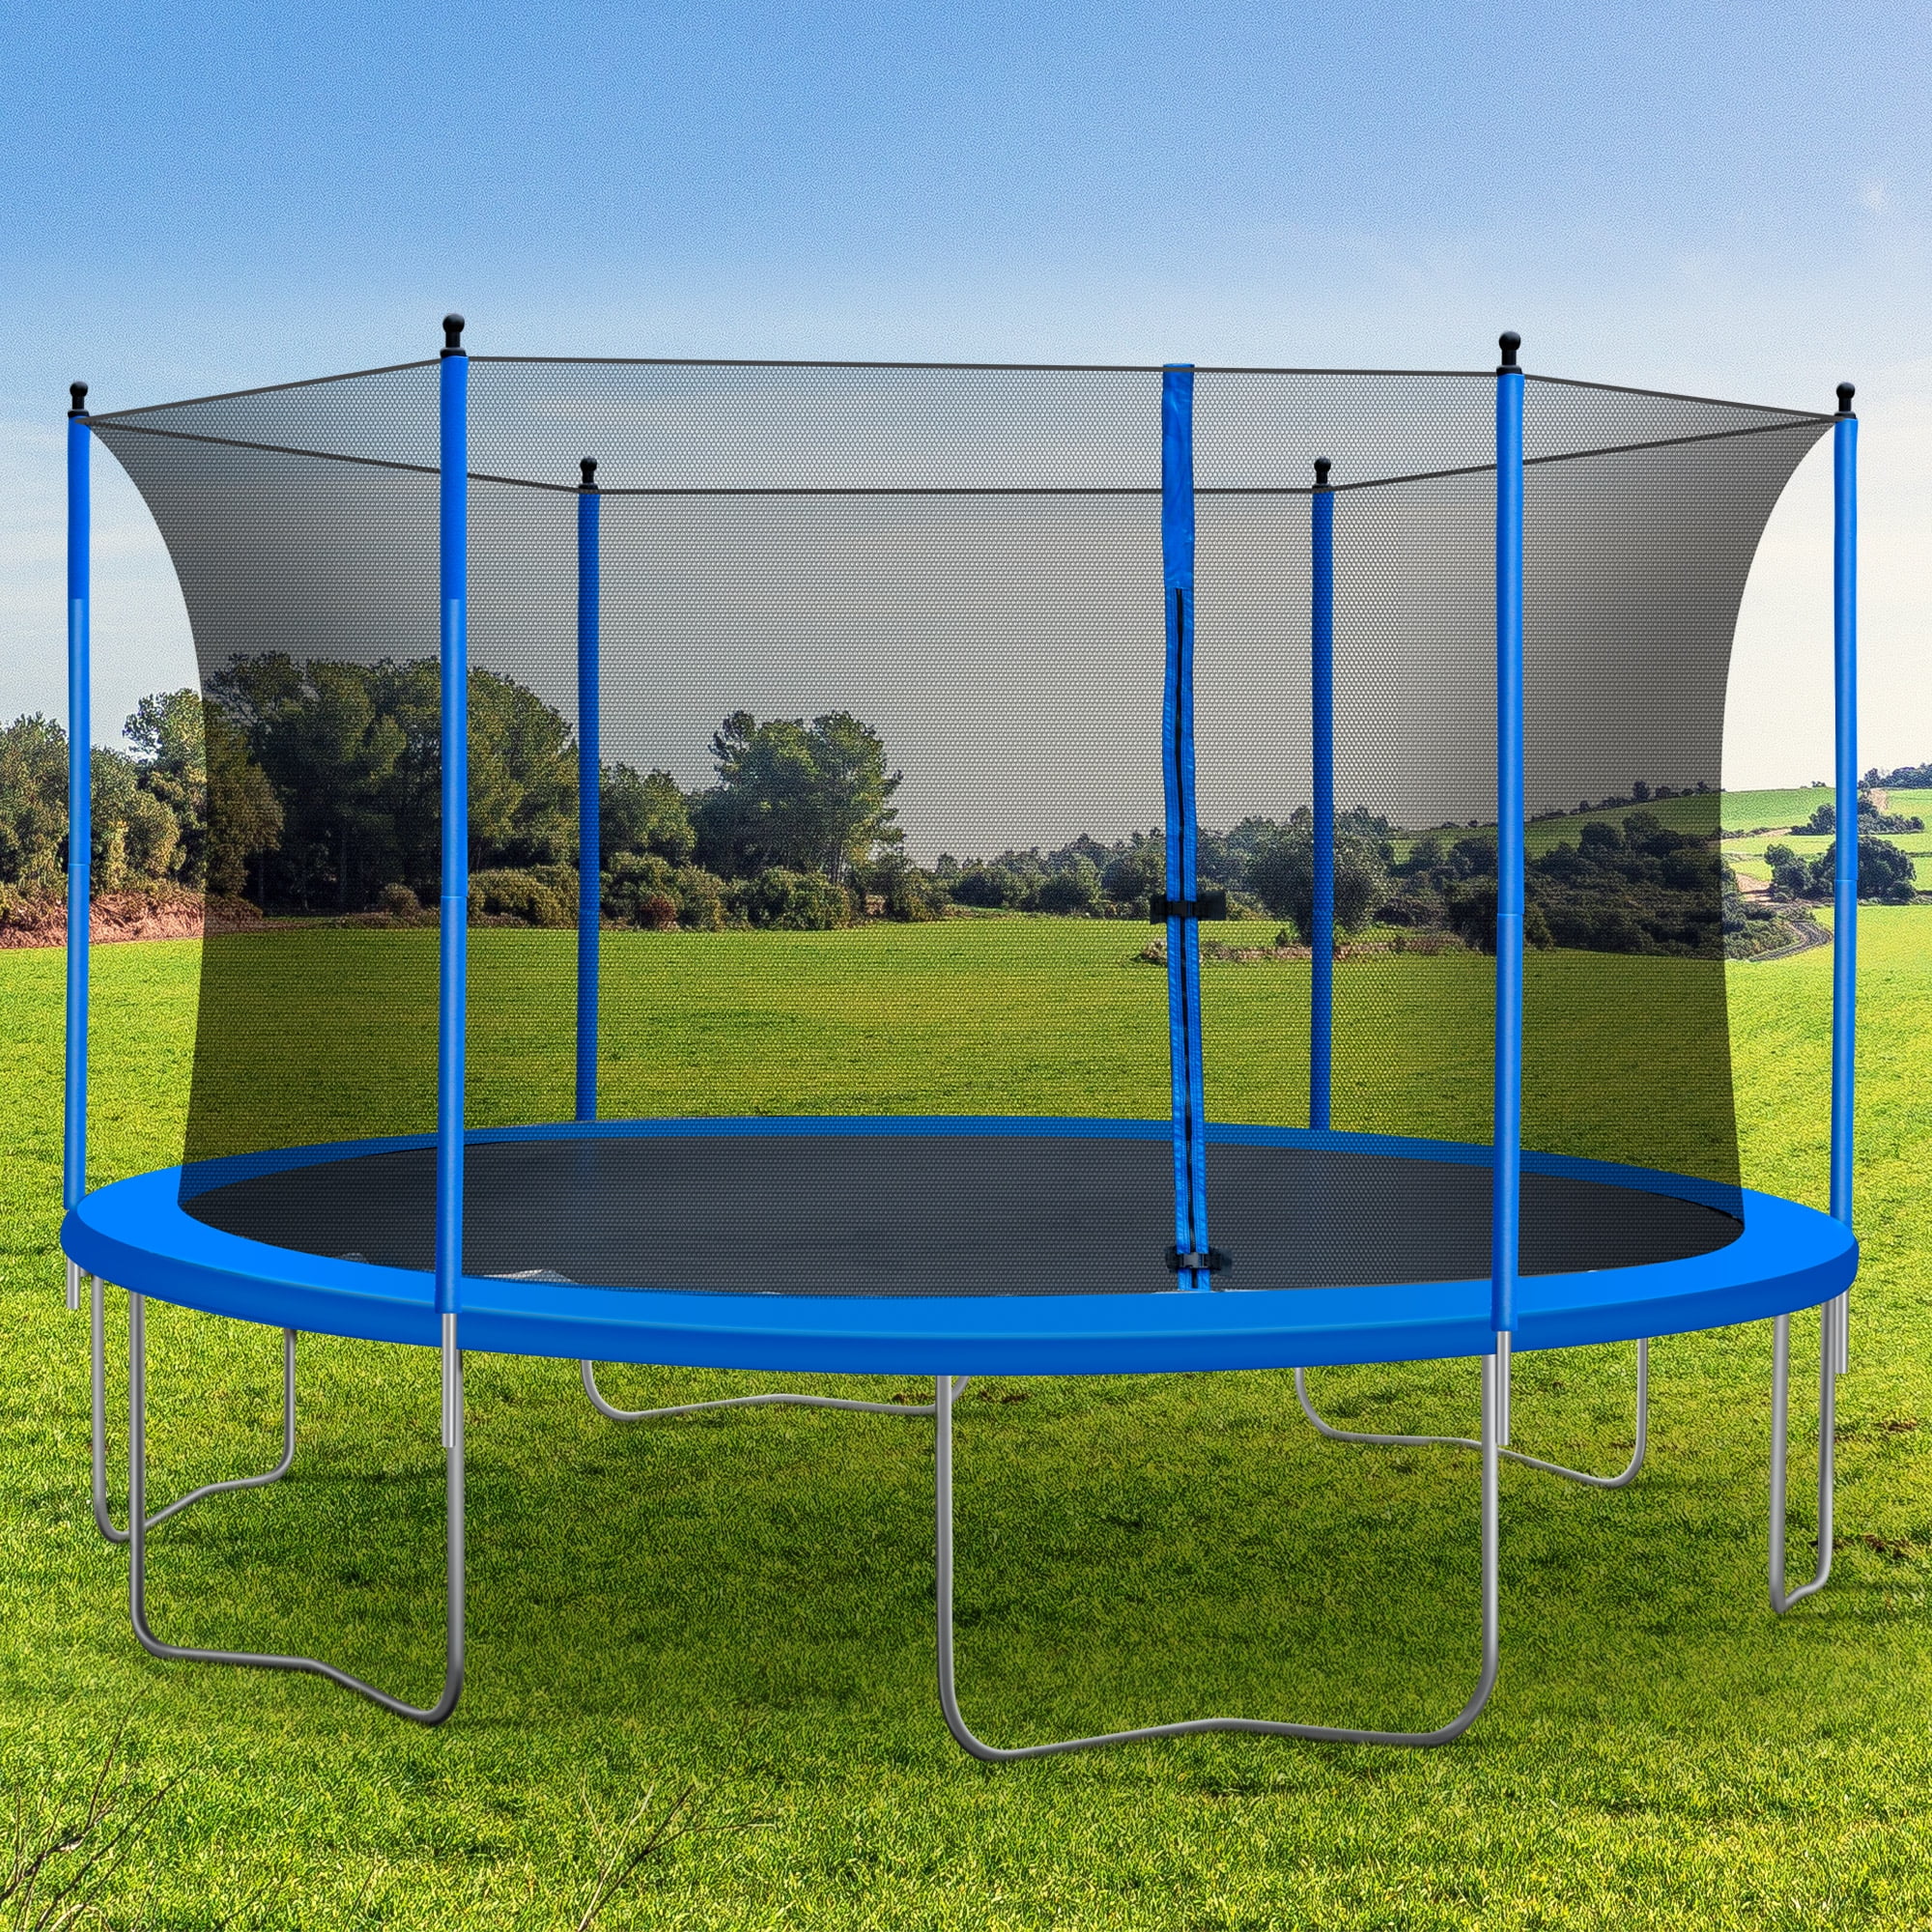 10FT Round Jumping Tabl Trampoline for Kids Sportspower Trampoline with Safety Enclosure Trampoline Net Trampoline Mat and Spring Pad Trampoline Accessories Best Combo Trampoline Fitness Equipment 